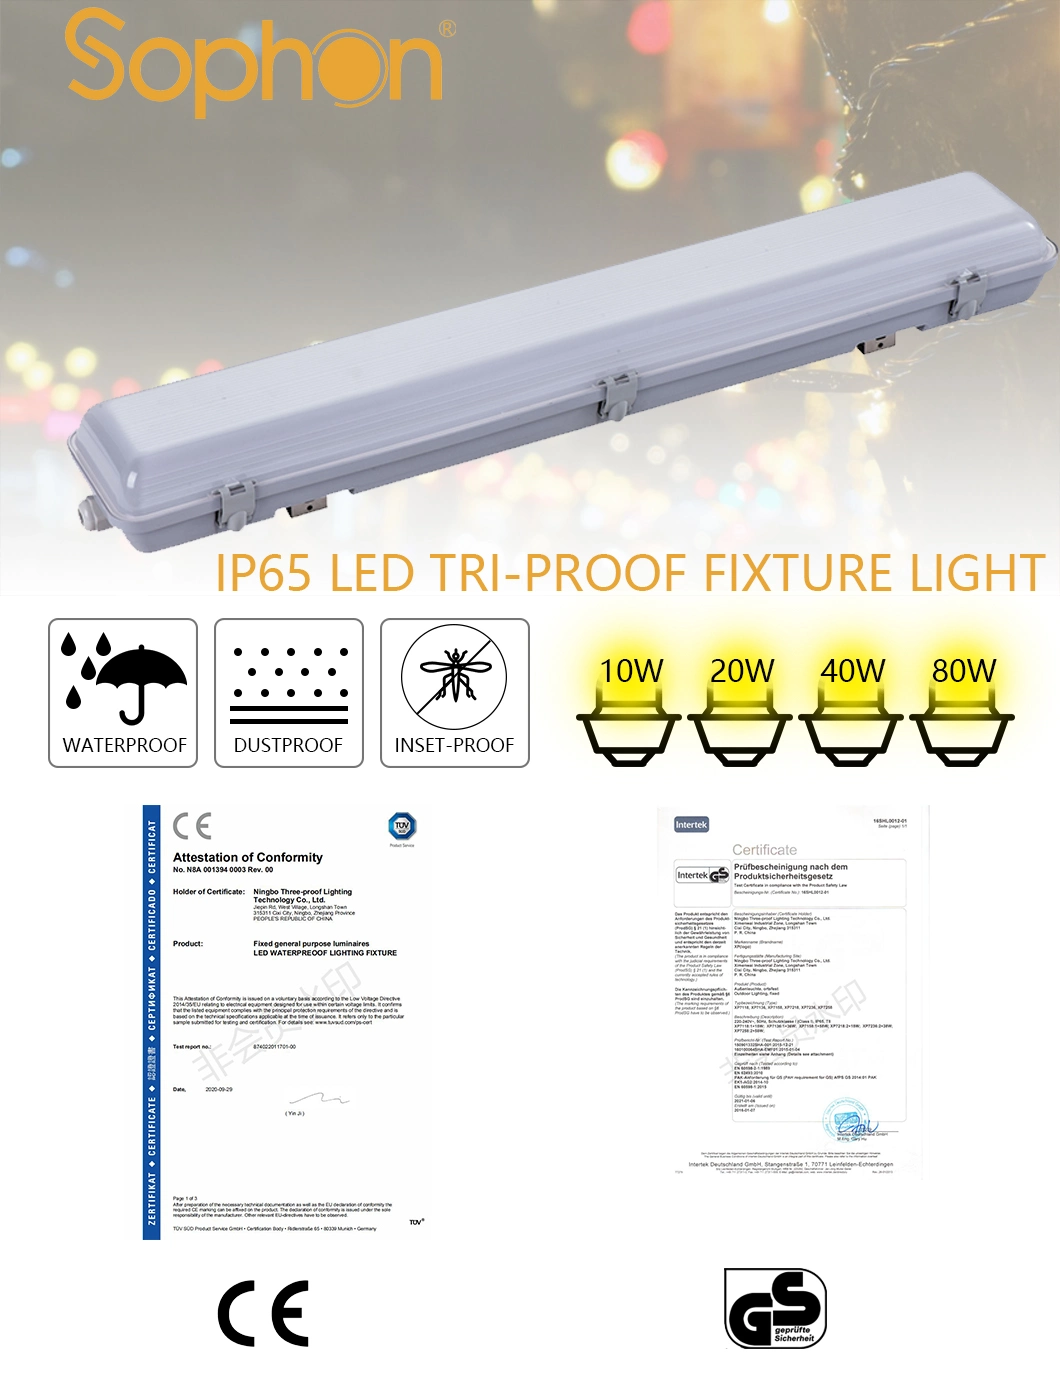 LED Triproof Light Explosion Proof Fixtures LED Light Linear IP65 Waterproof